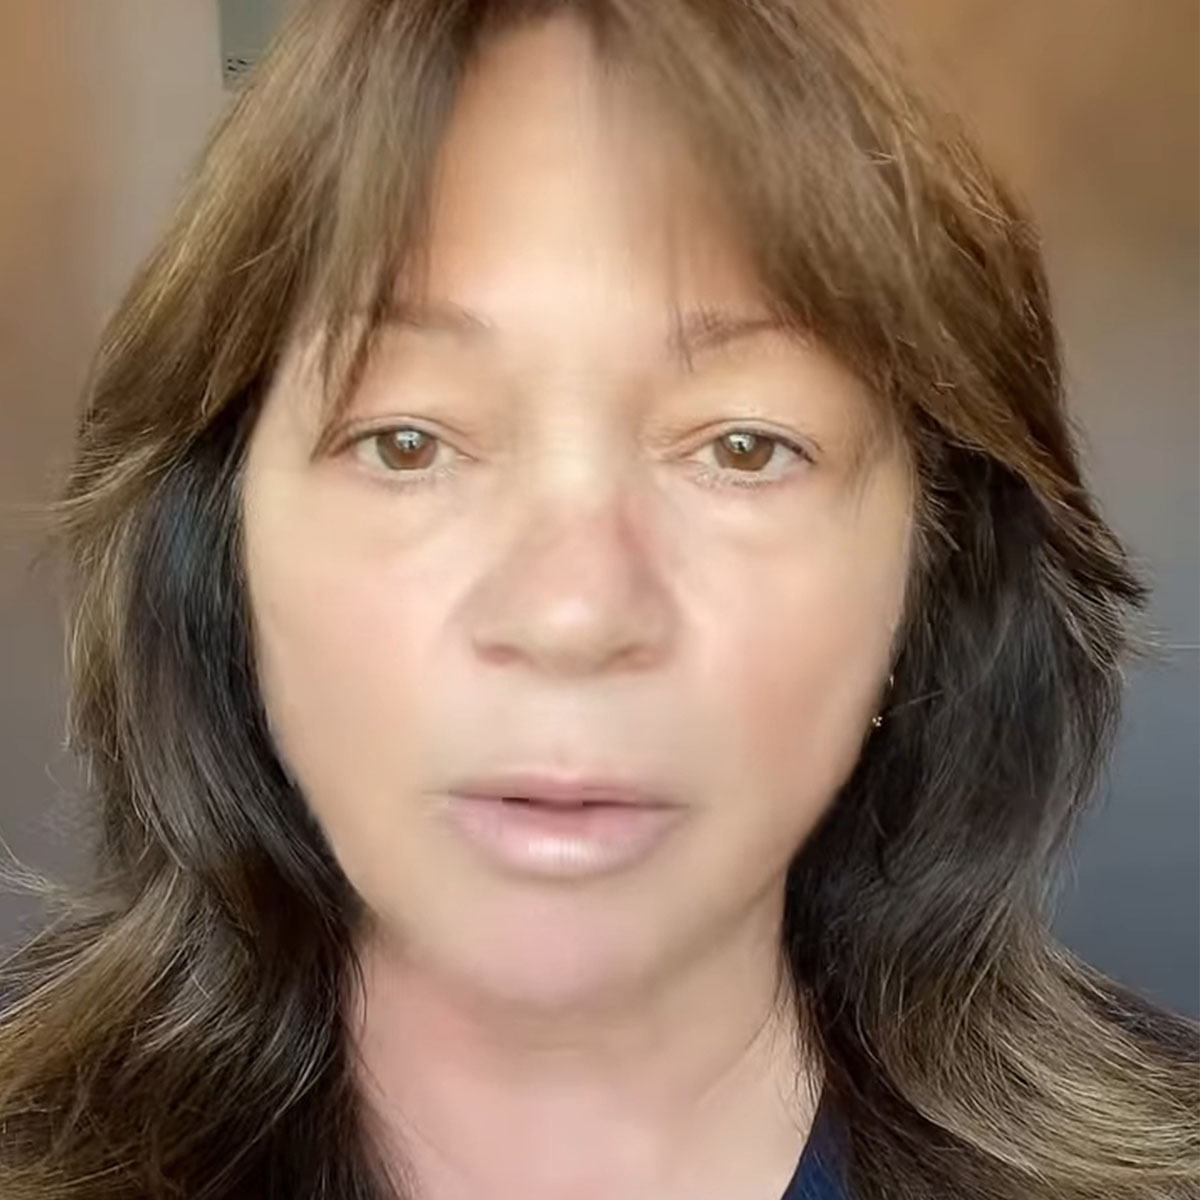 Valerie Bertinelli Reveals Her Gray Roots in Candid Video — Watch!